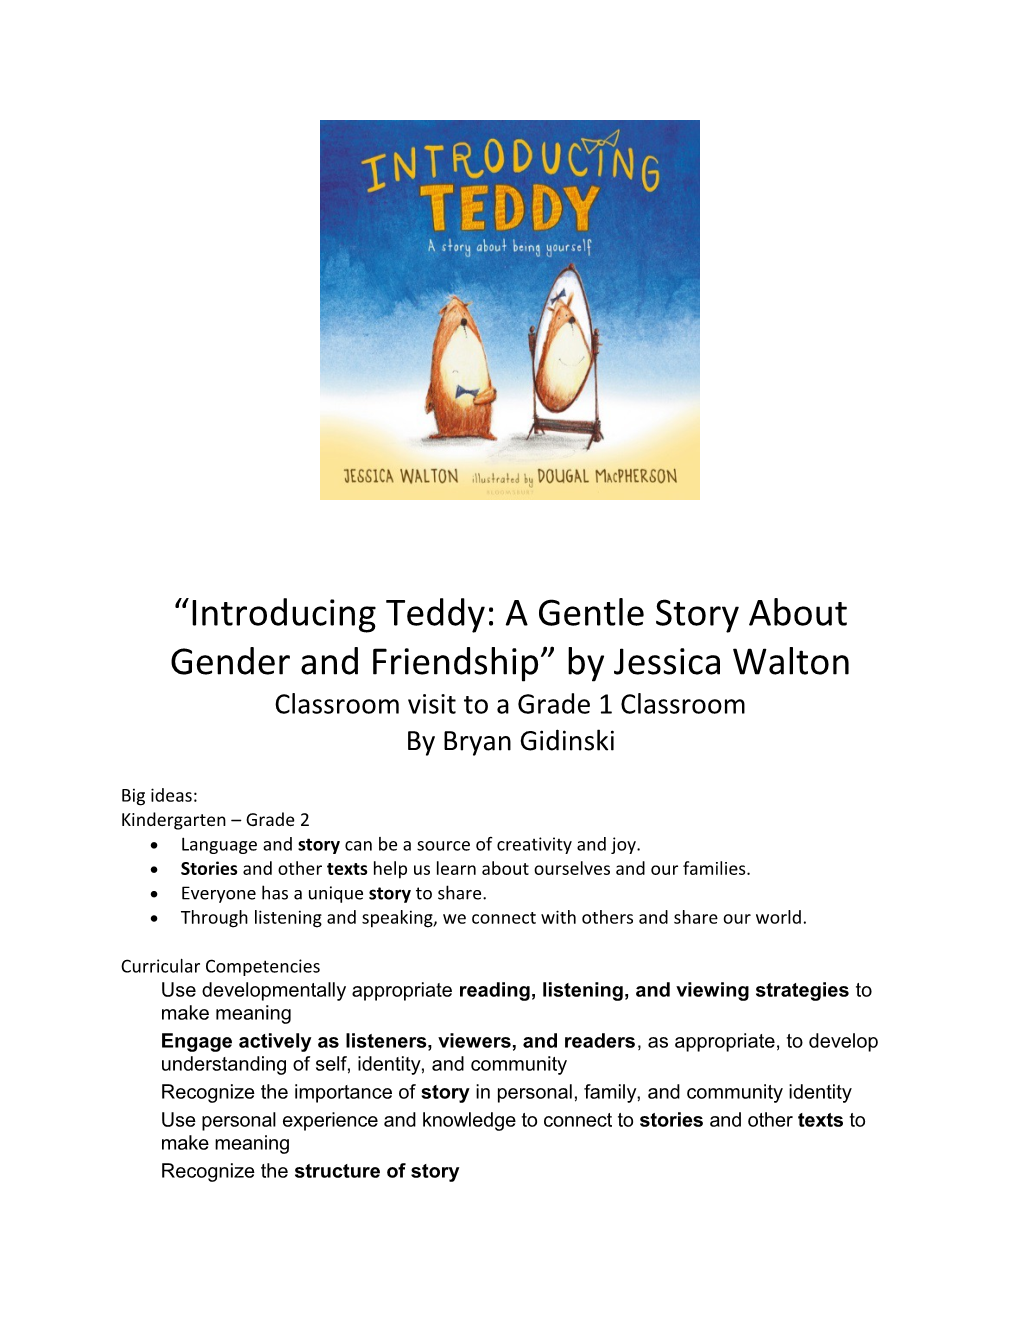 Introducing Teddy: a Gentle Story About Gender and Friendship by Jessica Walton